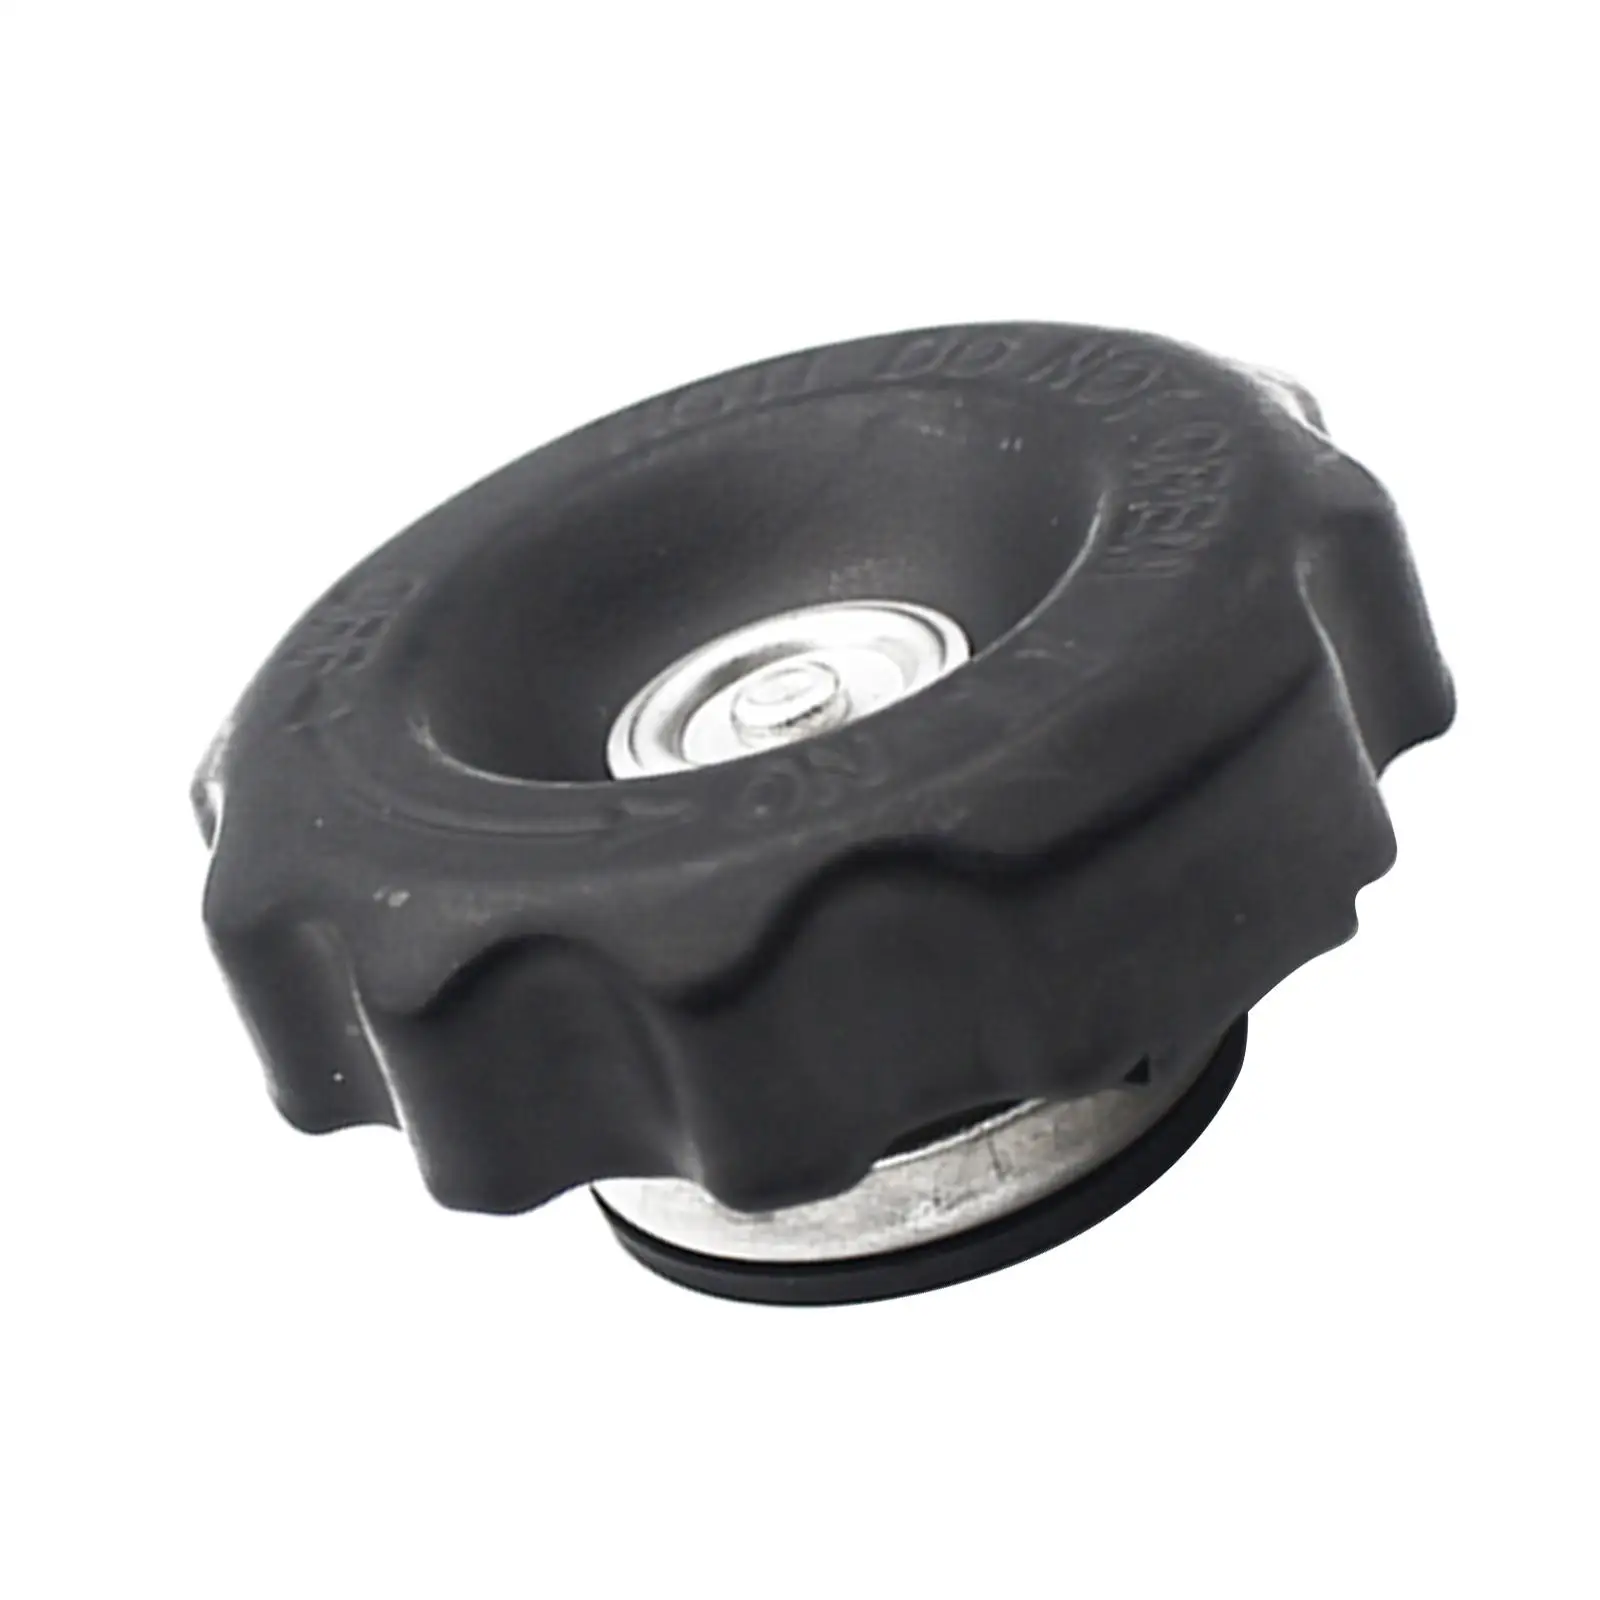 Motorbike Caps Cover Aluminum Black High Quality Accessories Universal Replacement Assemblies Motorcycle Part